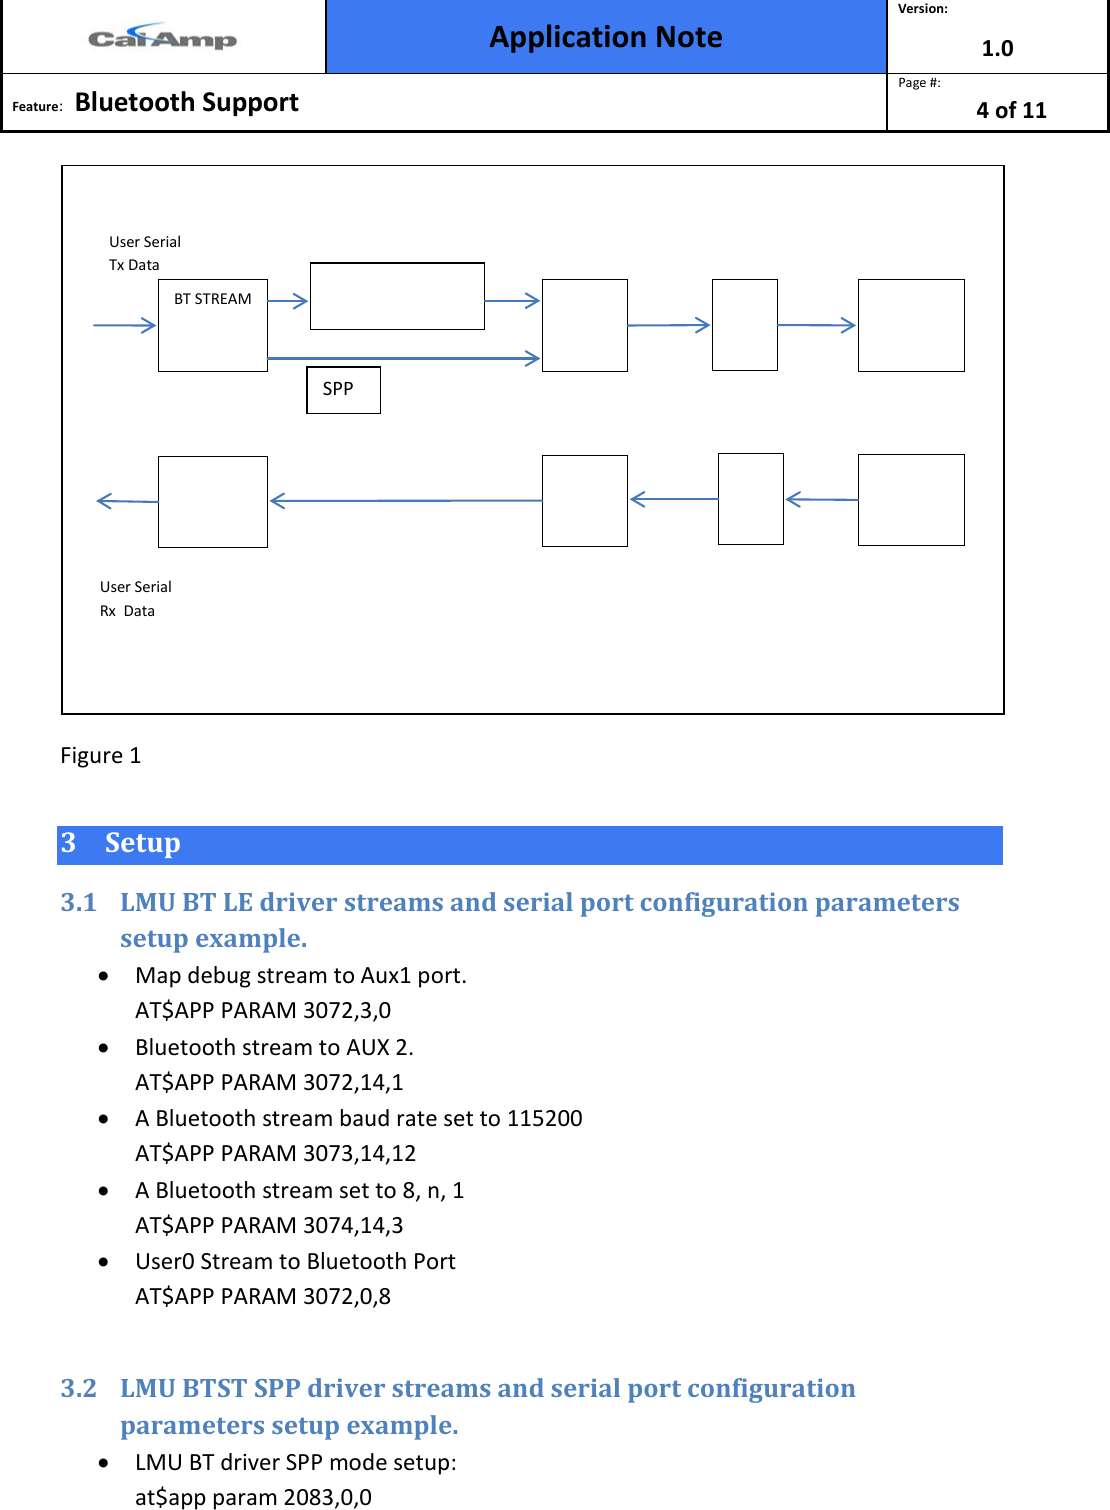  Application Note Version: 1.0  Feature:   Bluetooth Support  Page #: 4 of 11   Figure 1 3 Setup  3.1 LMU BT LE driver streams and serial port configuration parameters setup example.  • Map debug stream to Aux1 port. AT$APP PARAM 3072,3,0 • Bluetooth stream to AUX 2. AT$APP PARAM 3072,14,1 • A Bluetooth stream baud rate set to 115200 AT$APP PARAM 3073,14,12 • A Bluetooth stream set to 8, n, 1 AT$APP PARAM 3074,14,3 • User0 Stream to Bluetooth Port AT$APP PARAM 3072,0,8  3.2 LMU BTST SPP driver streams and serial port configuration parameters setup example.  • LMU BT driver SPP mode setup: at$app param 2083,0,0  User Serial  Tx Data BT STREAM BLE  “AT cmd” Parser BT_DRV  BT_ Sensor BT_ Sensor BT_DRV  BT STREAM User Serial Rx  Data BTCS BTCS SPP 